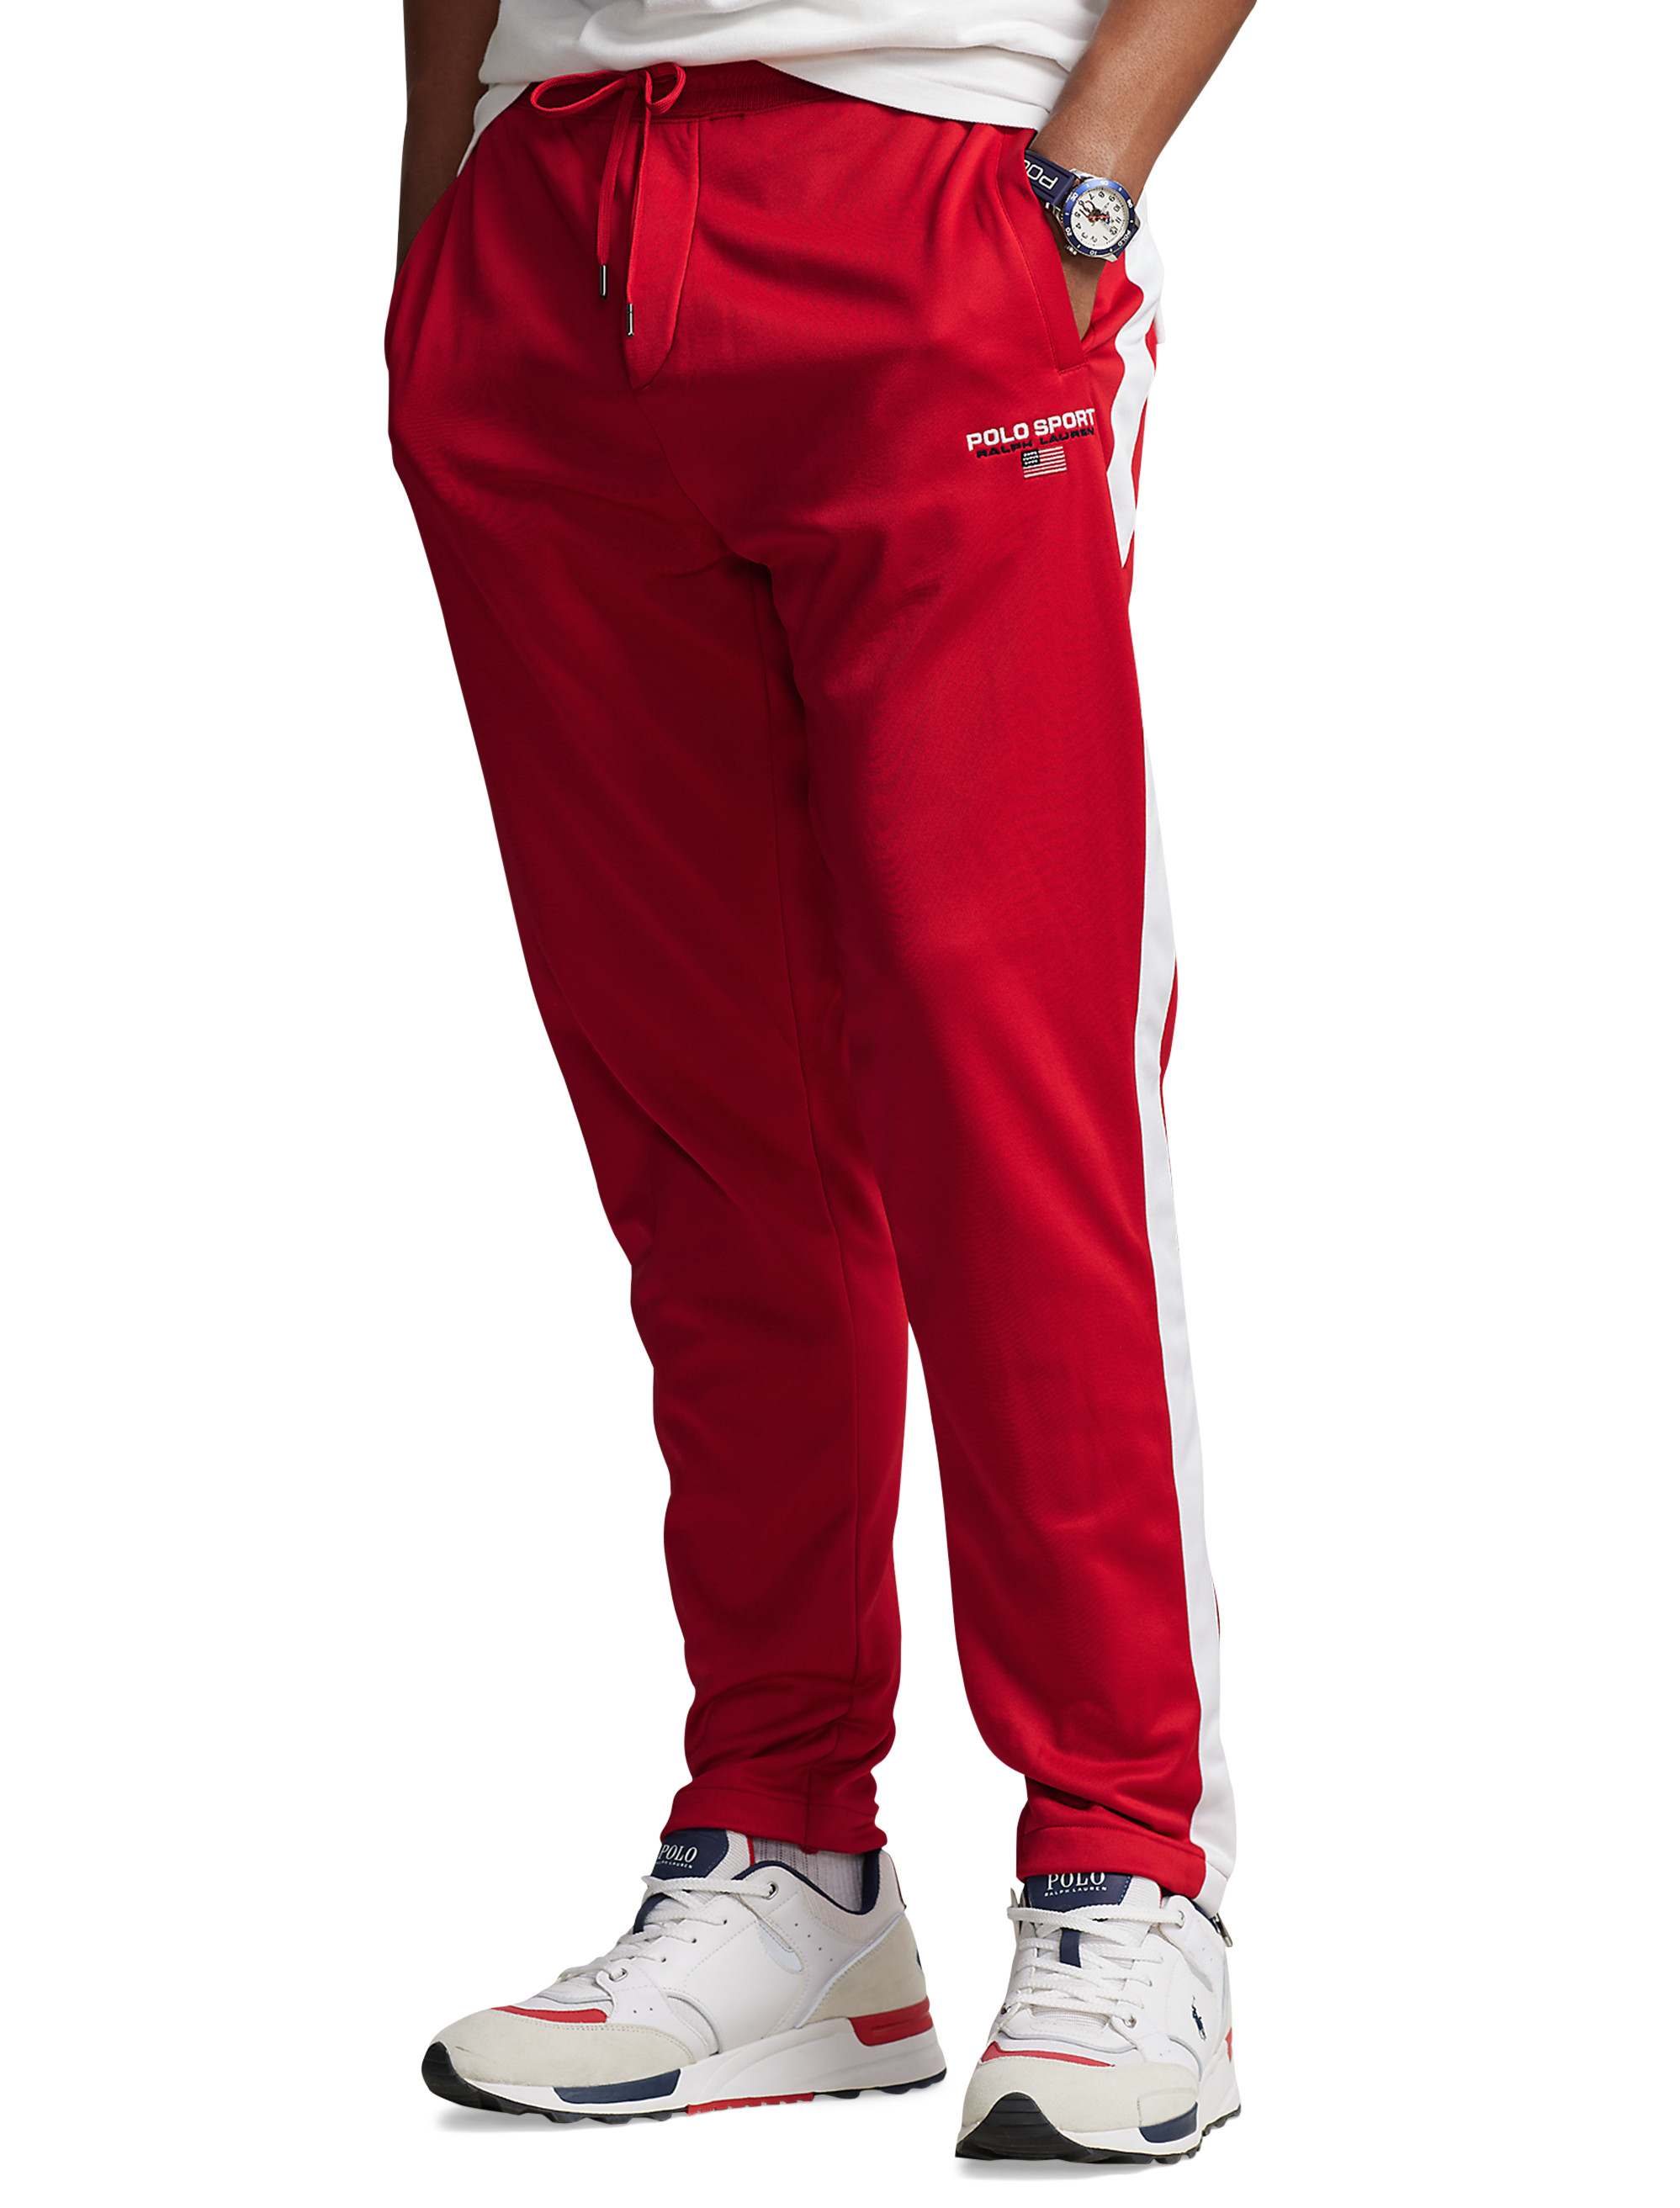 POLO SPORT TRACK PANTS — quell